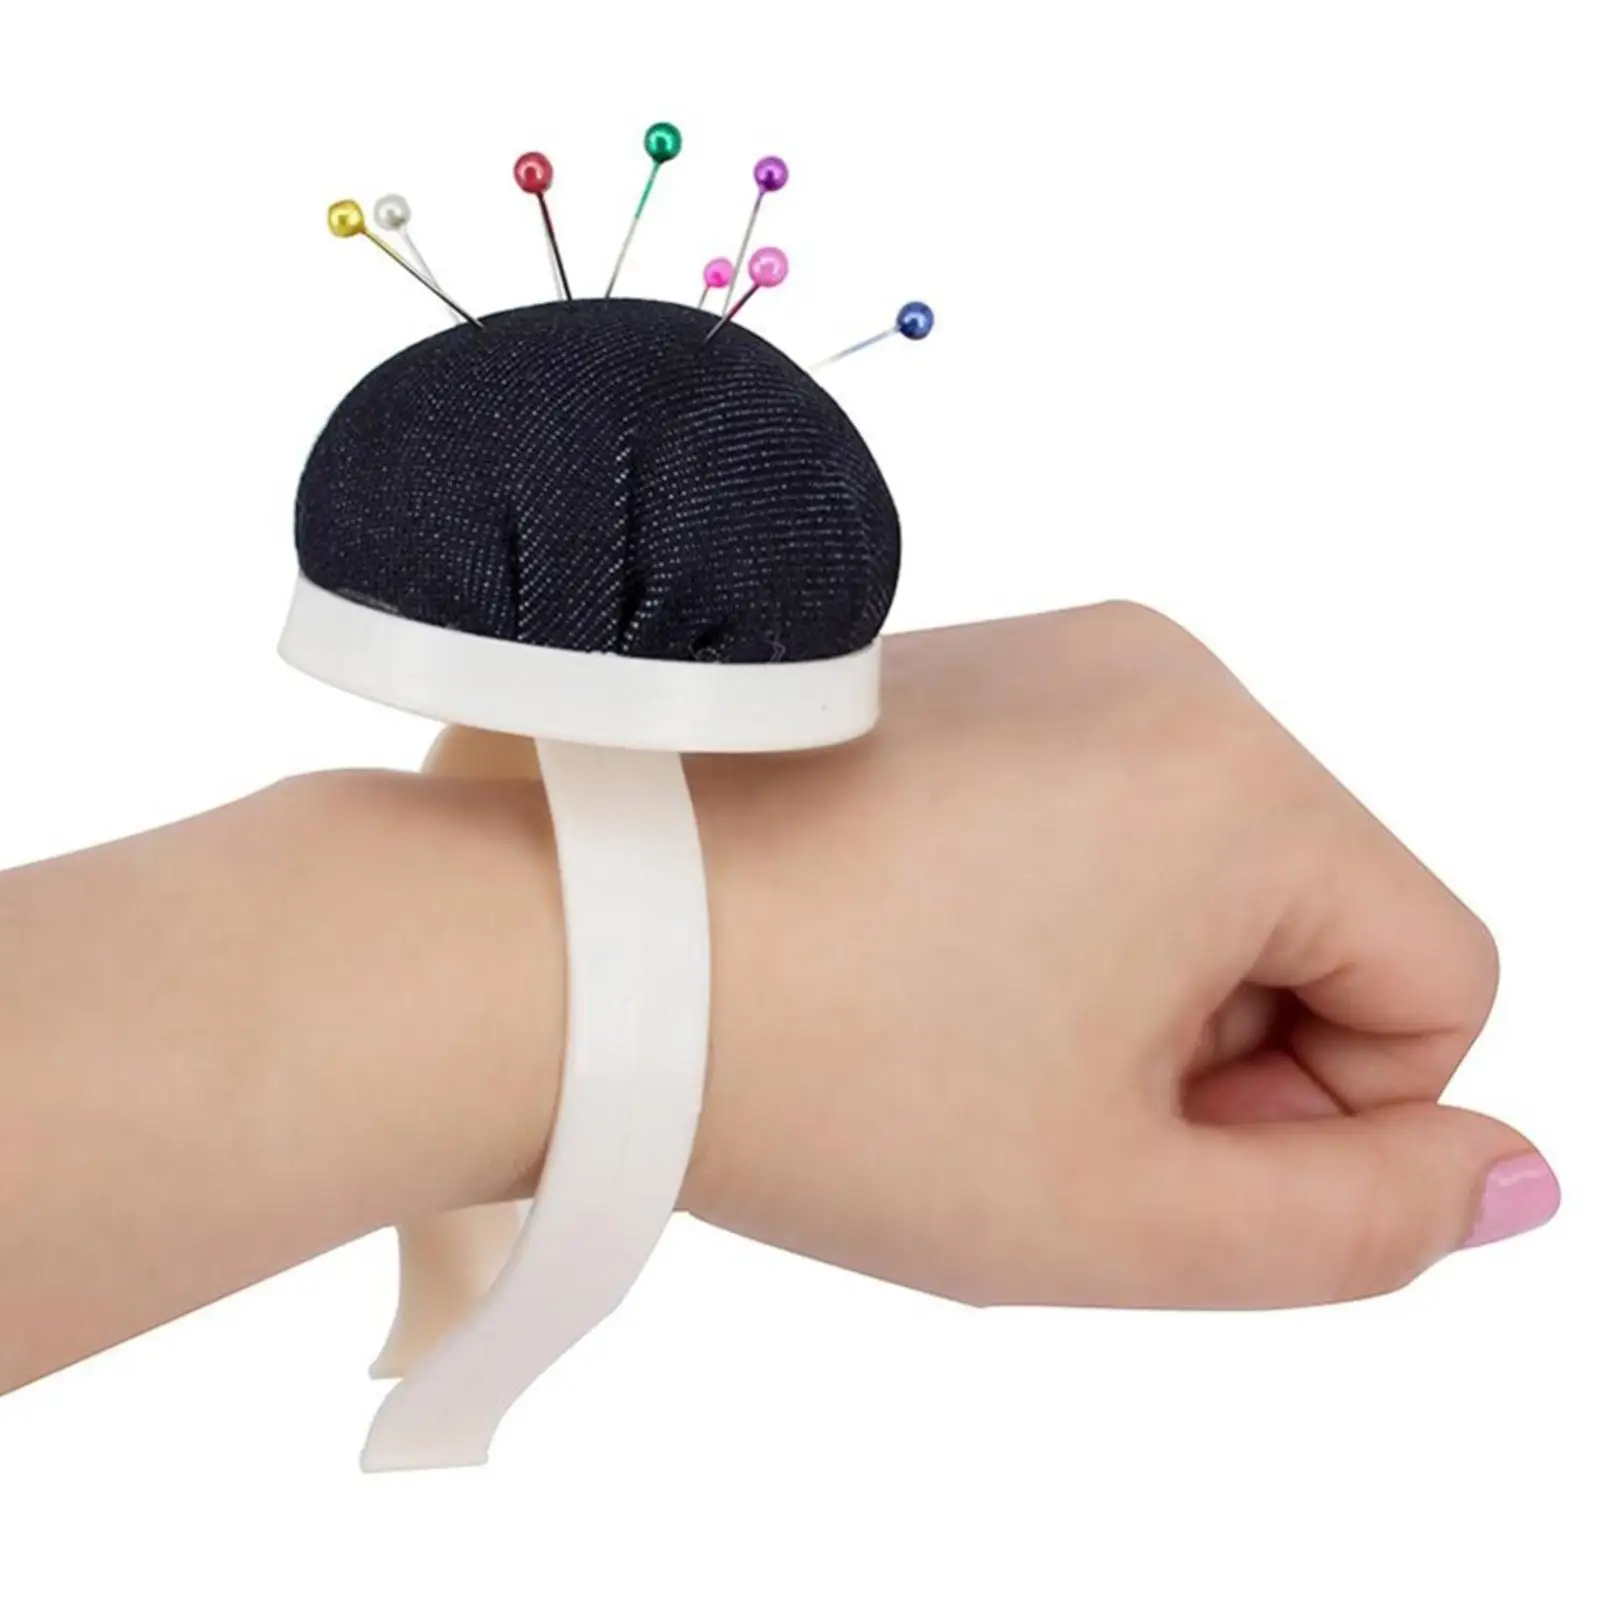 Wrist Wearable cushion Sewing Cushion for Handcraft Needlework Sewing Tool